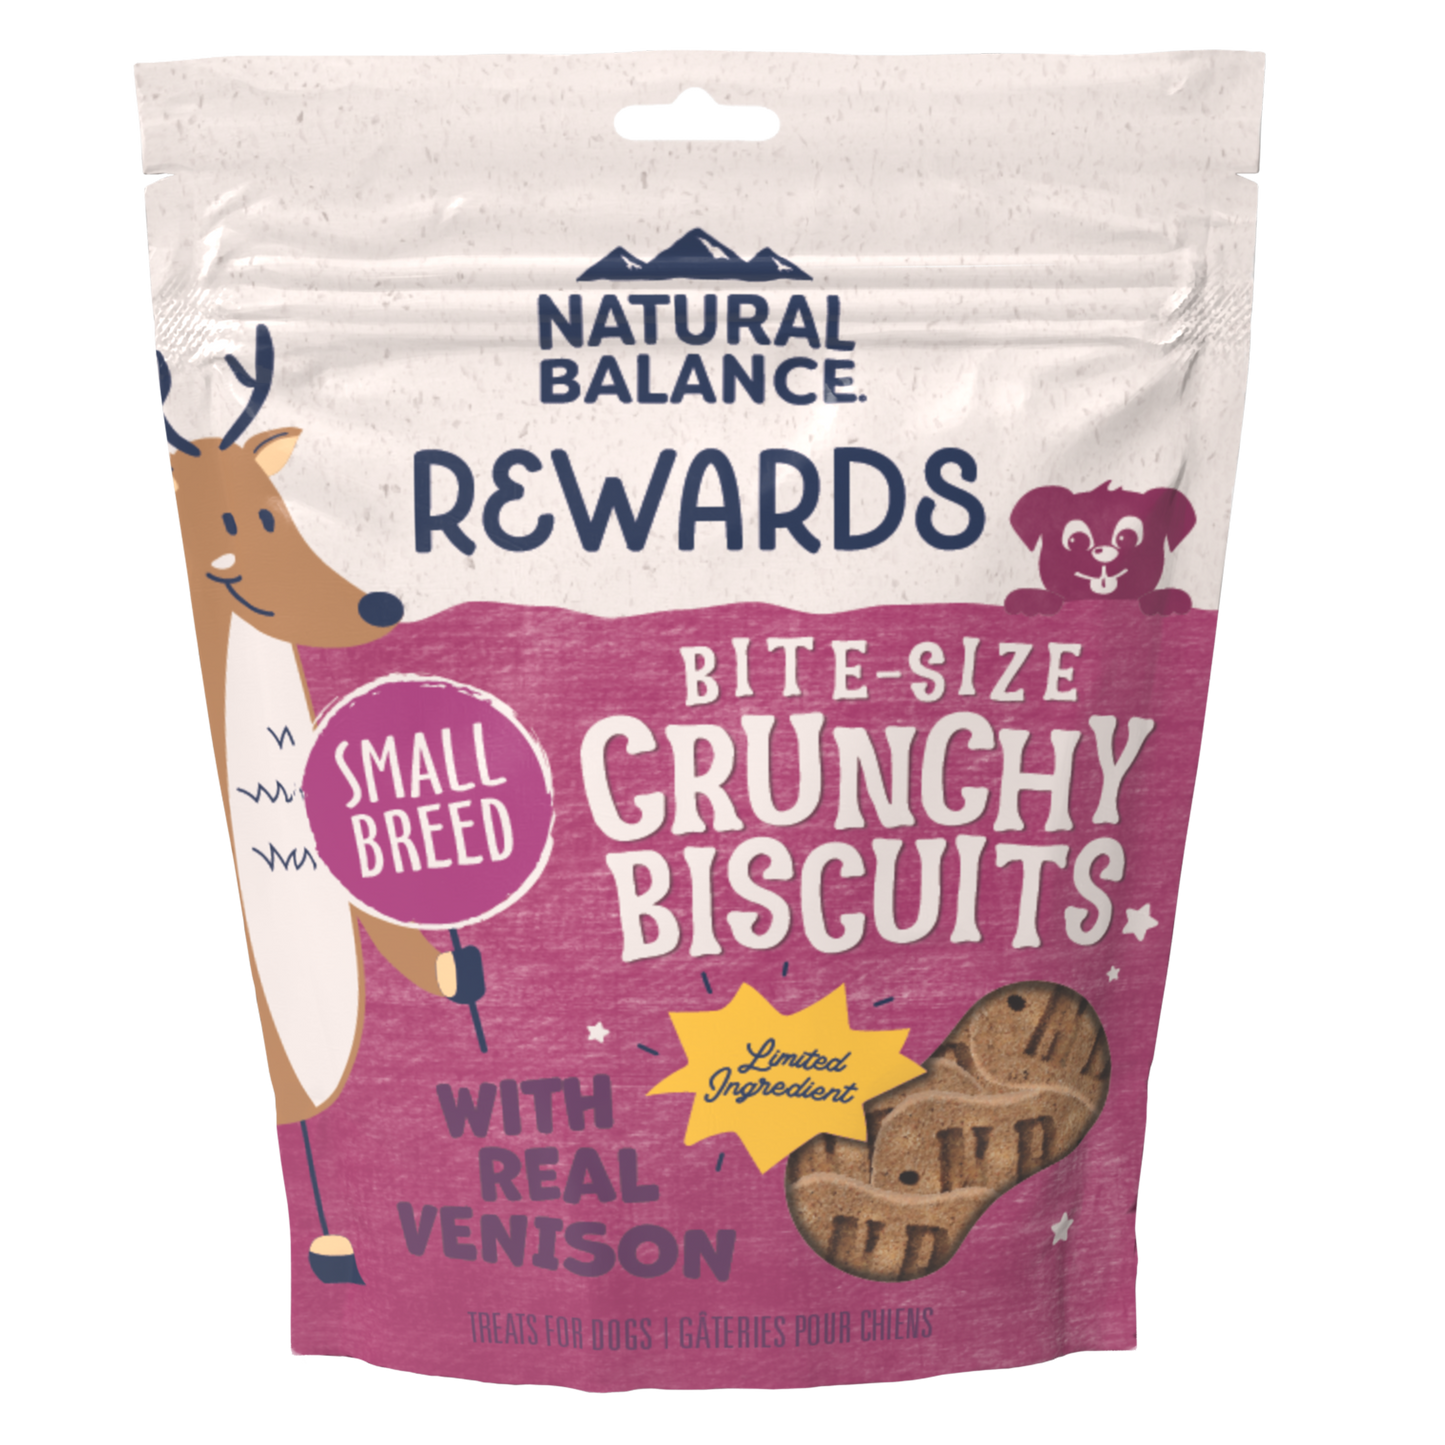 Natural Balance Limited Ingredient Crunchy Biscuits Small Breed Sweet Potato And Venison Recipe Dog Treat, 8-oz Bag